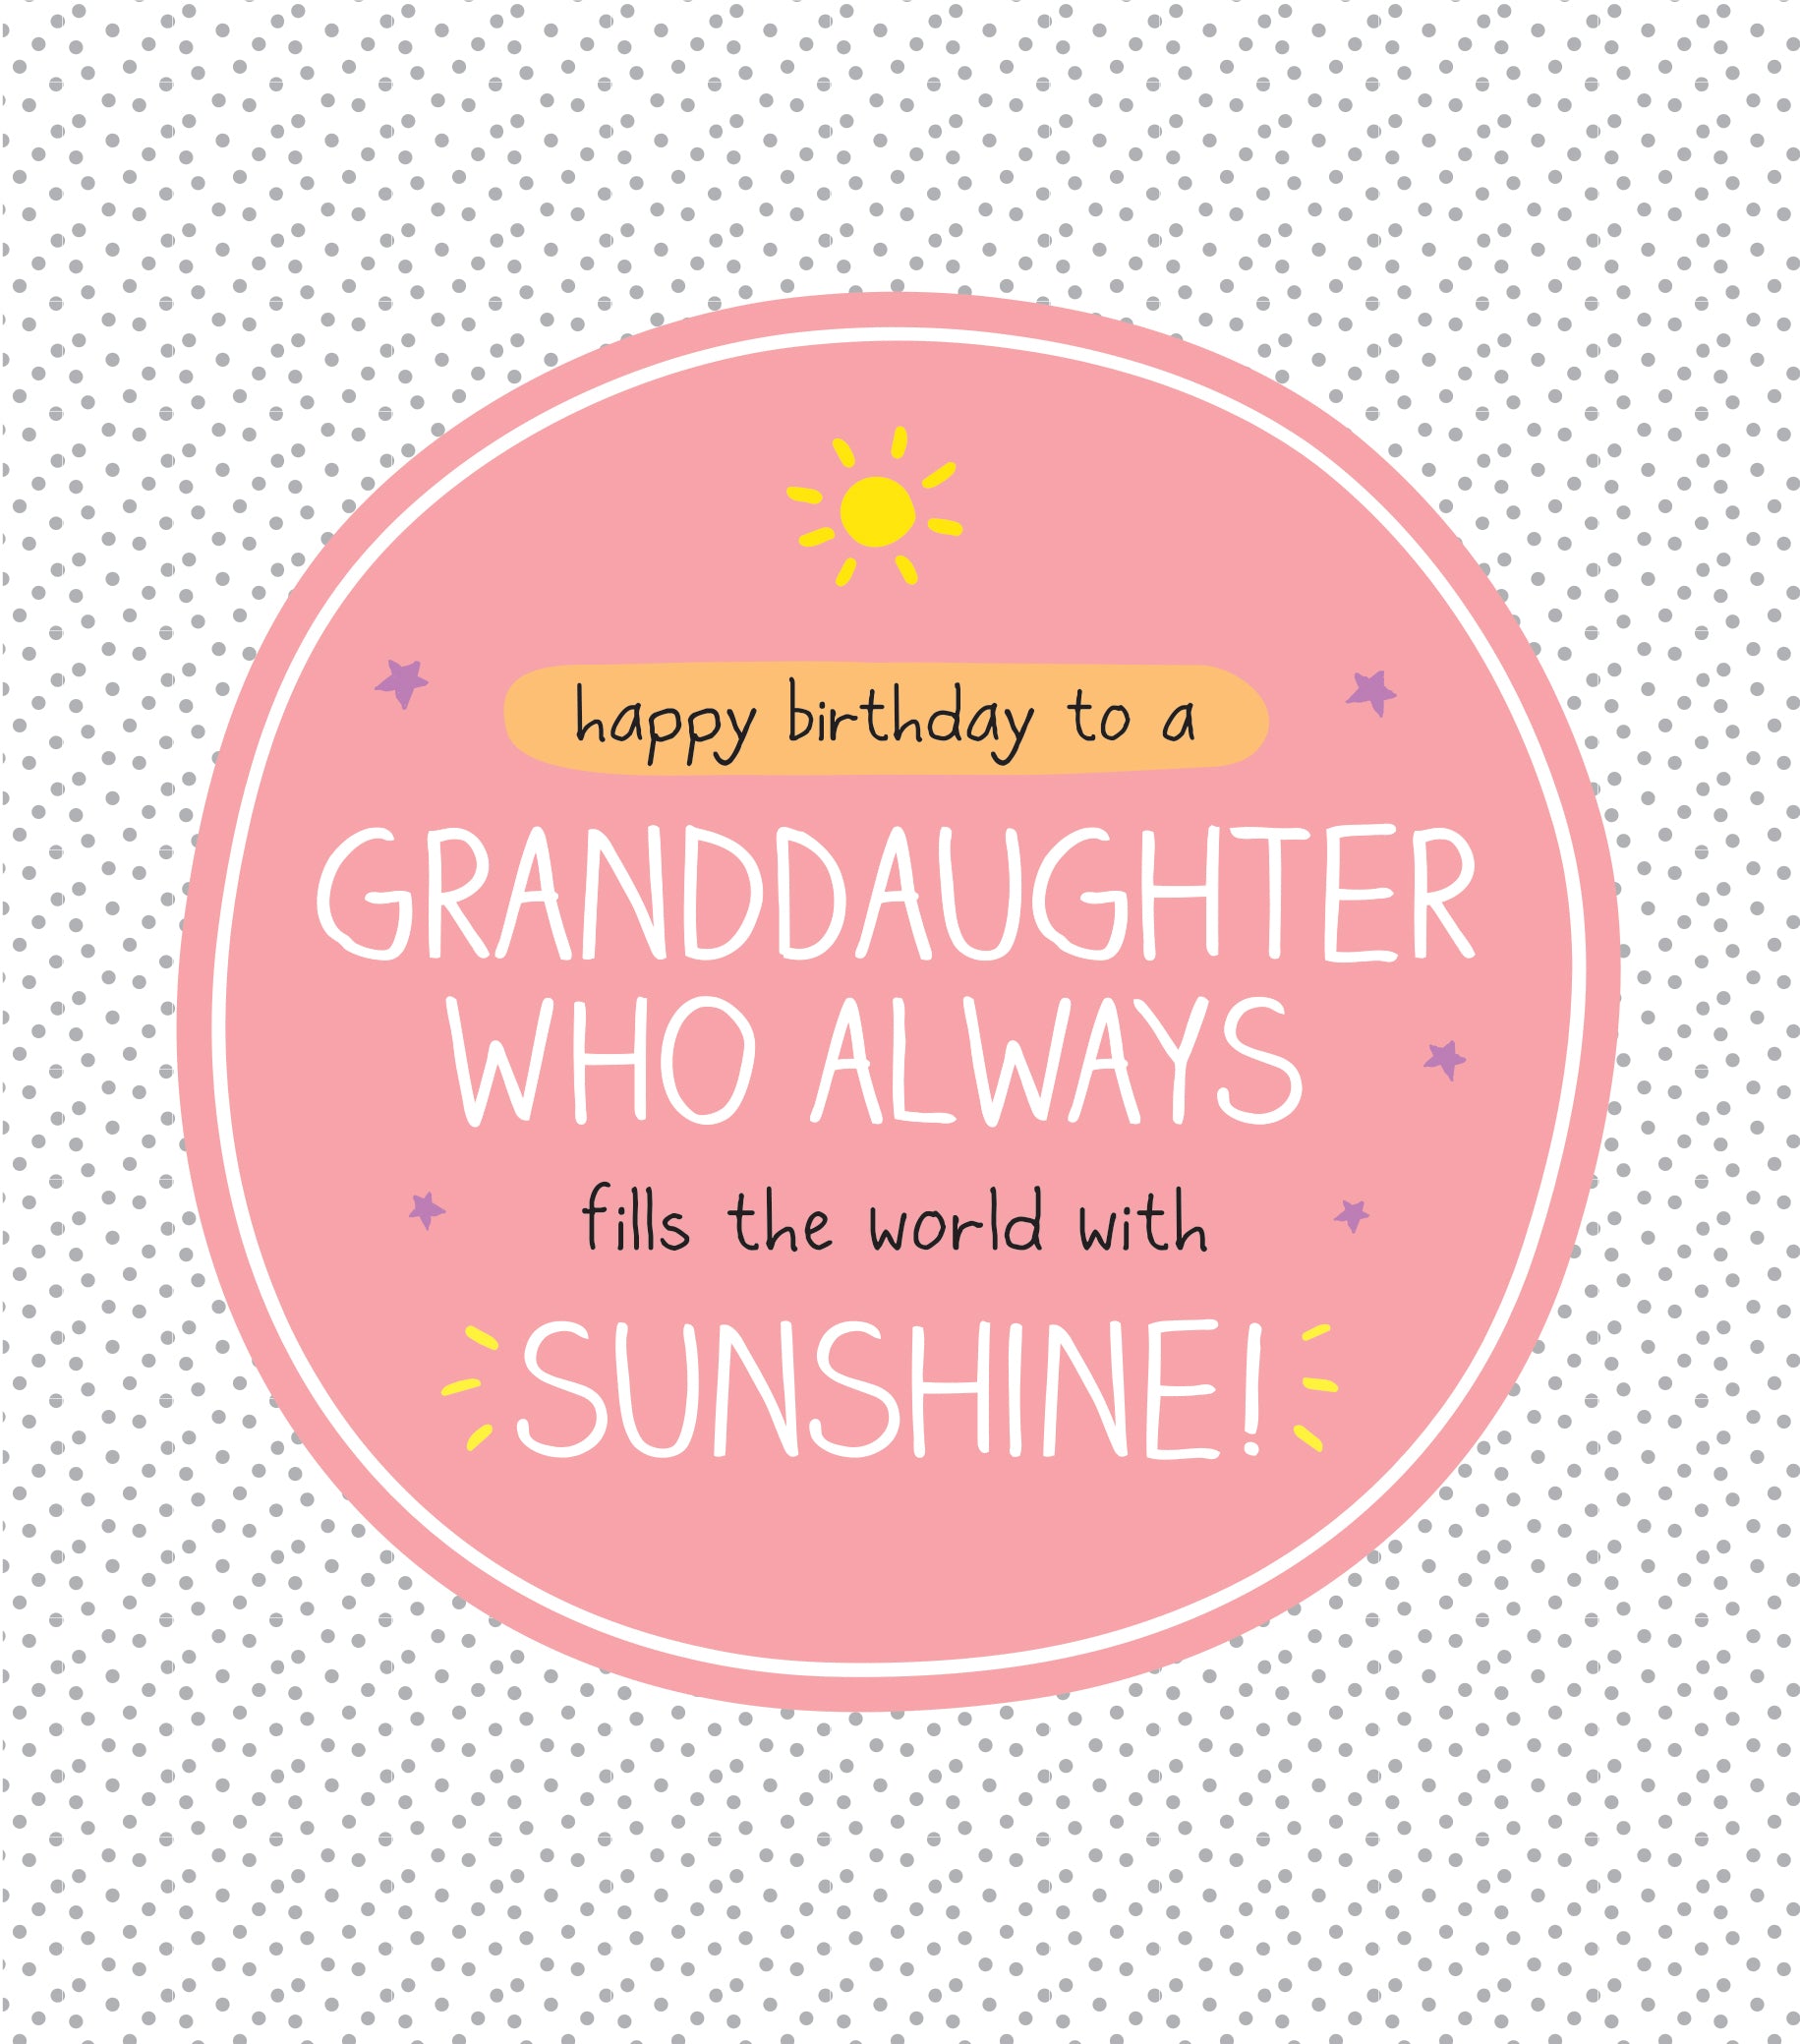 Granddaughter Fills World with Sunshine Birthday Card from Penny Black